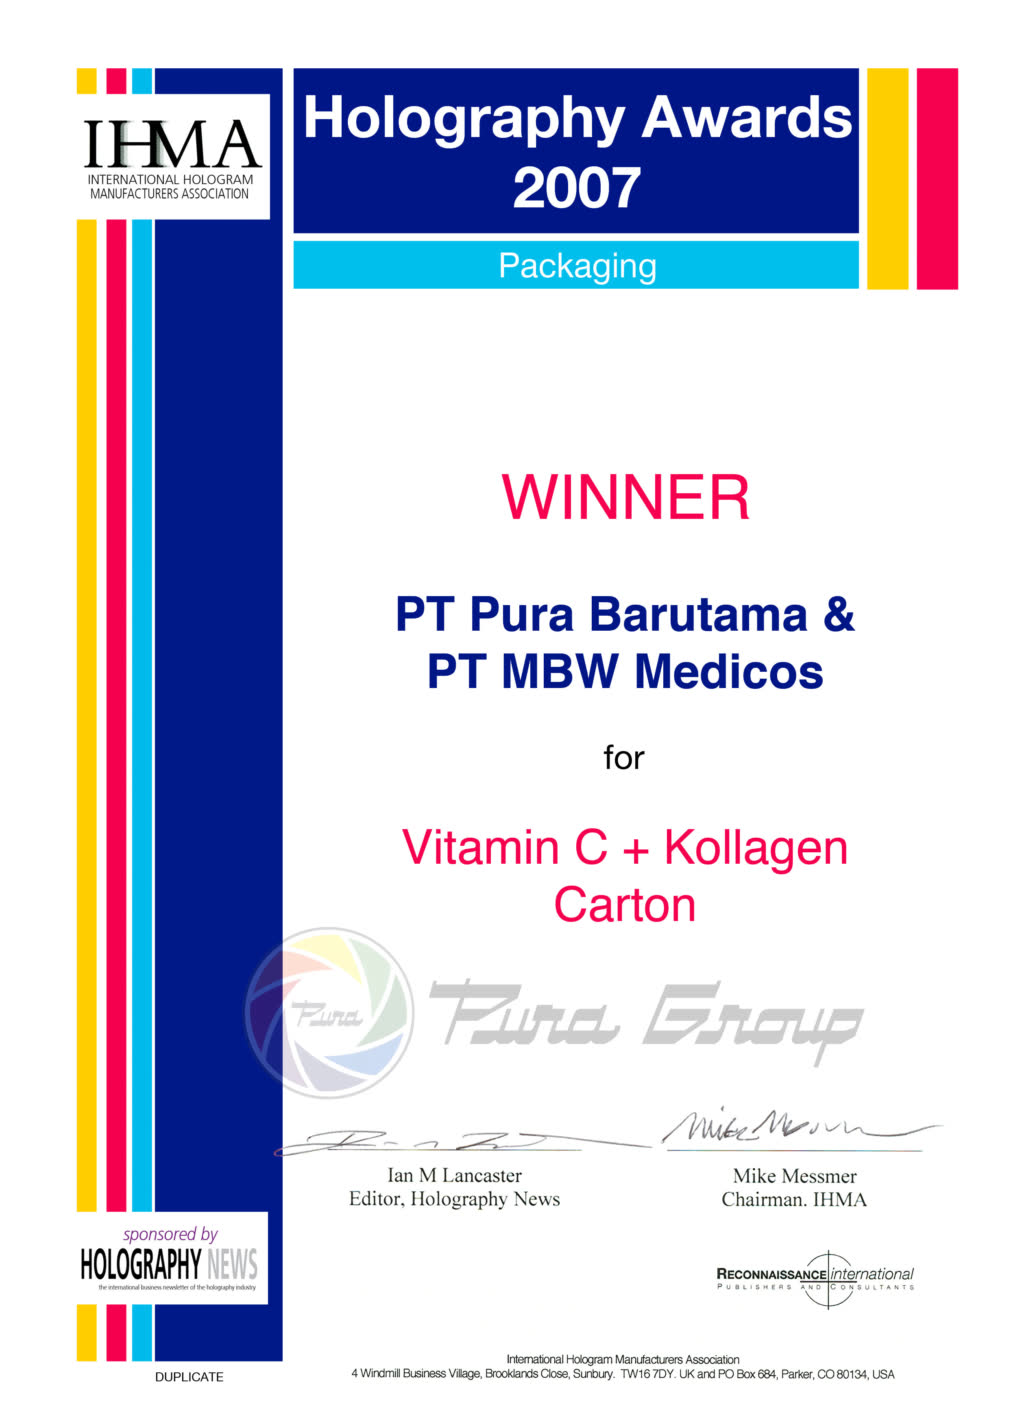 IHMA AWARD 2007 FOR PACKAGING APPLICATION